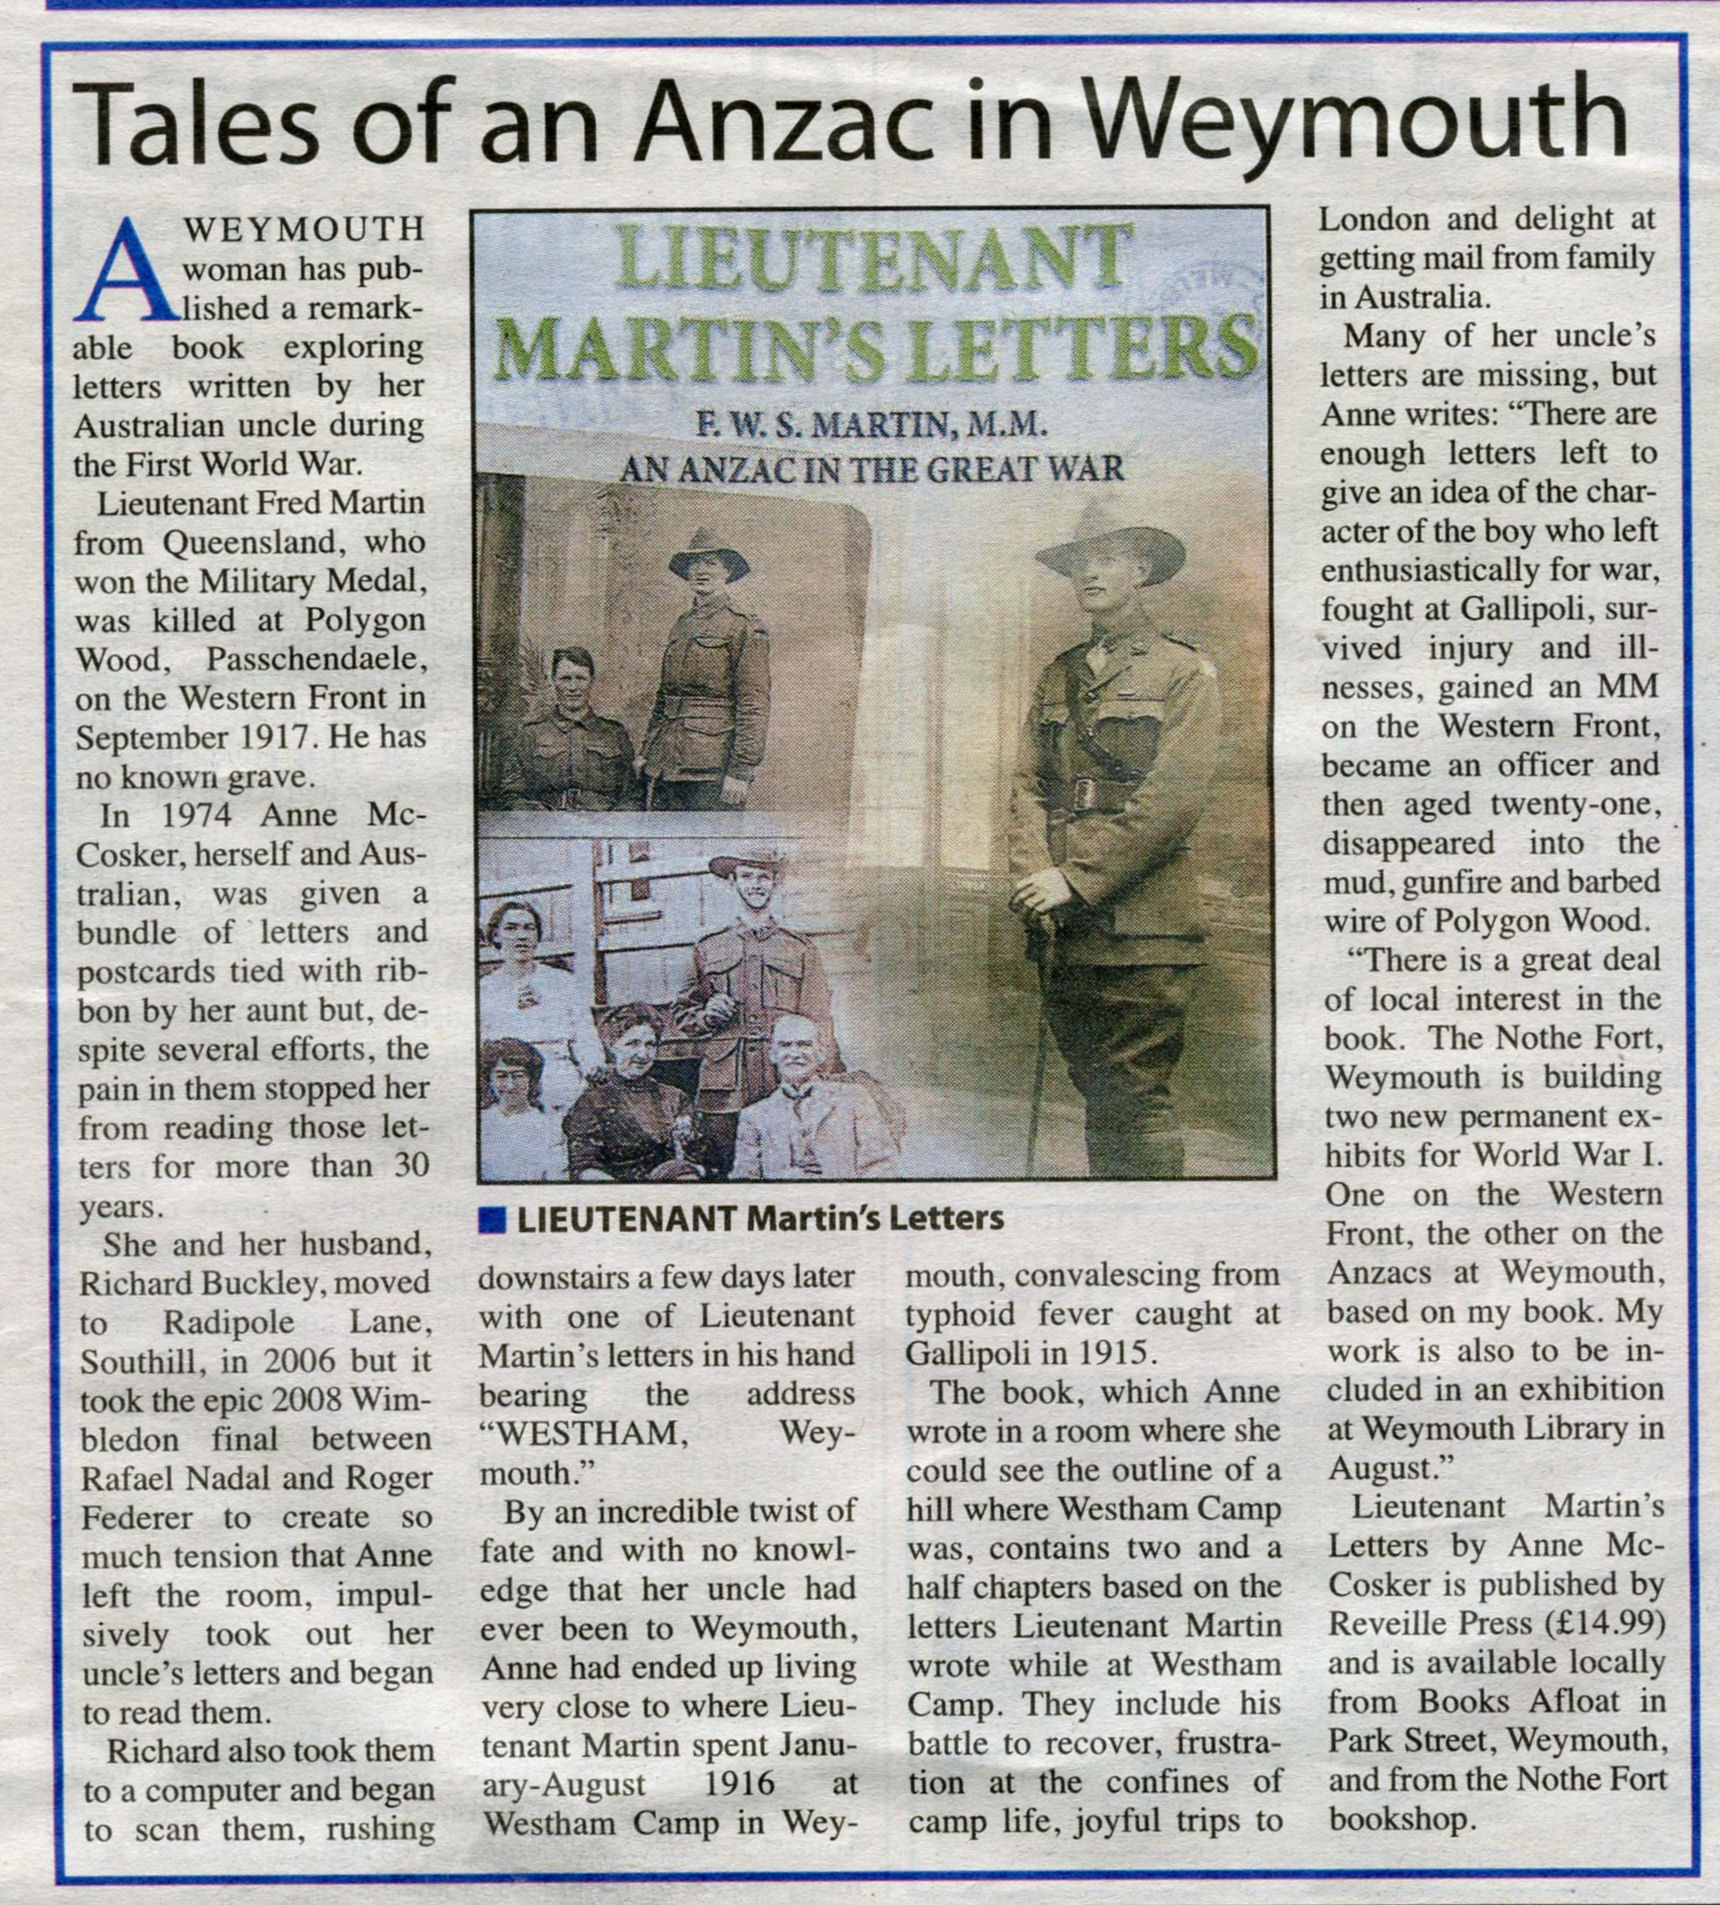 Review of  Lieutenant  Martin’s  Letters  from   Weymouth and Portland News,  2/4/2014